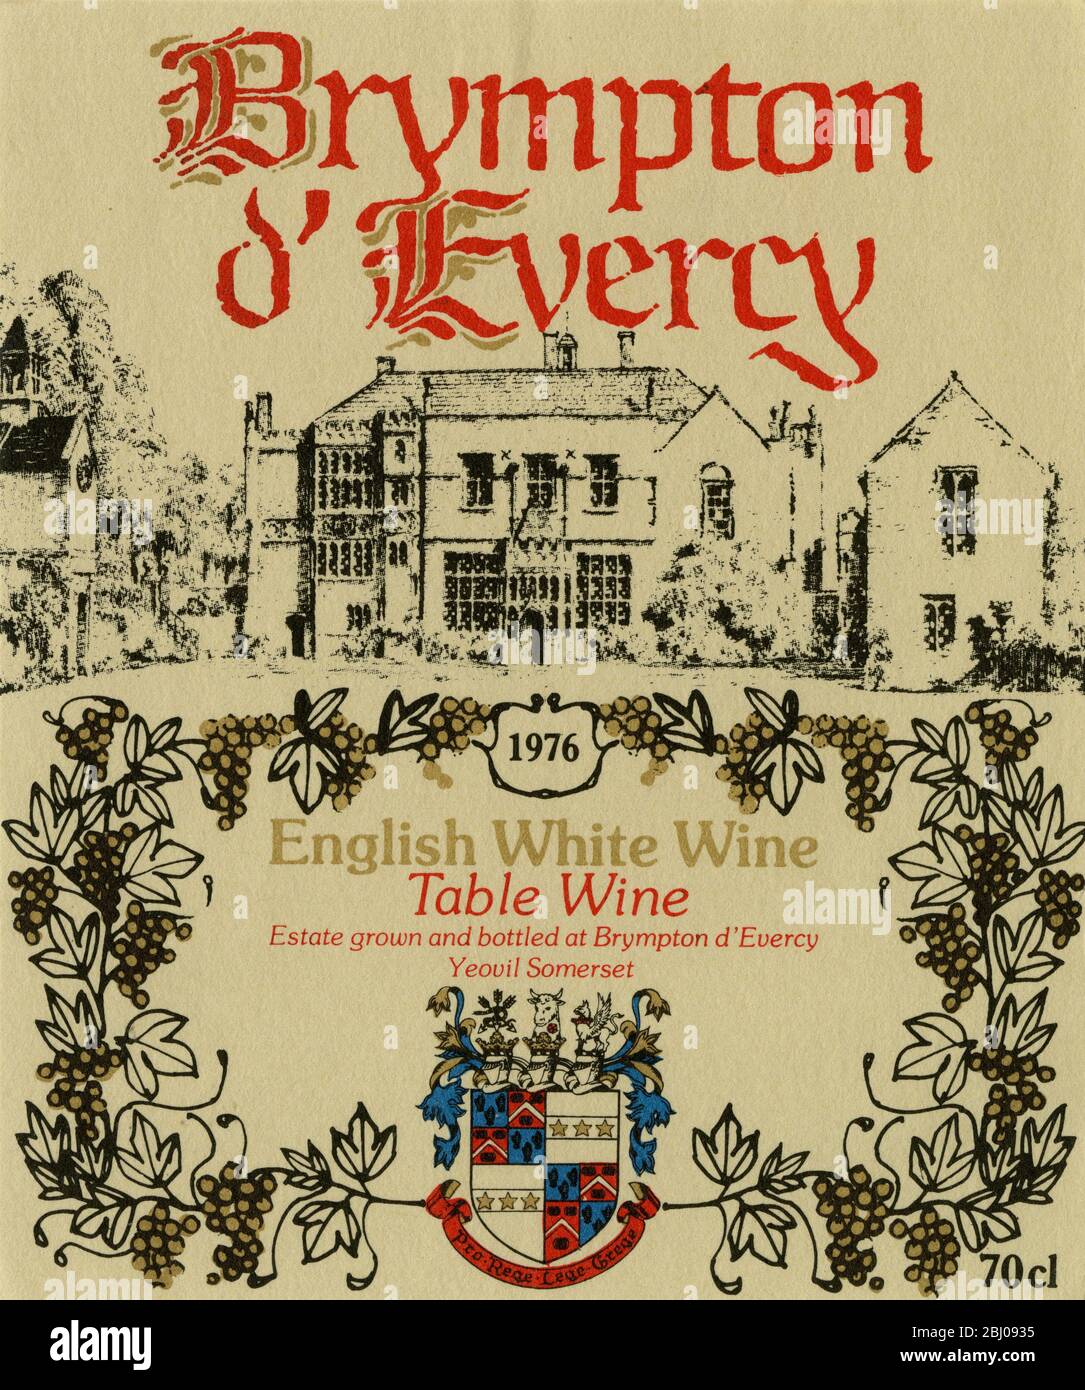 Wine Label. - Brympton D'Evercy. 1976. English White Wine. Table Wine. Estate Grown and Bottled at Byrmton d'Evercy Yeovil Somerset. - 70cl. Stock Photo